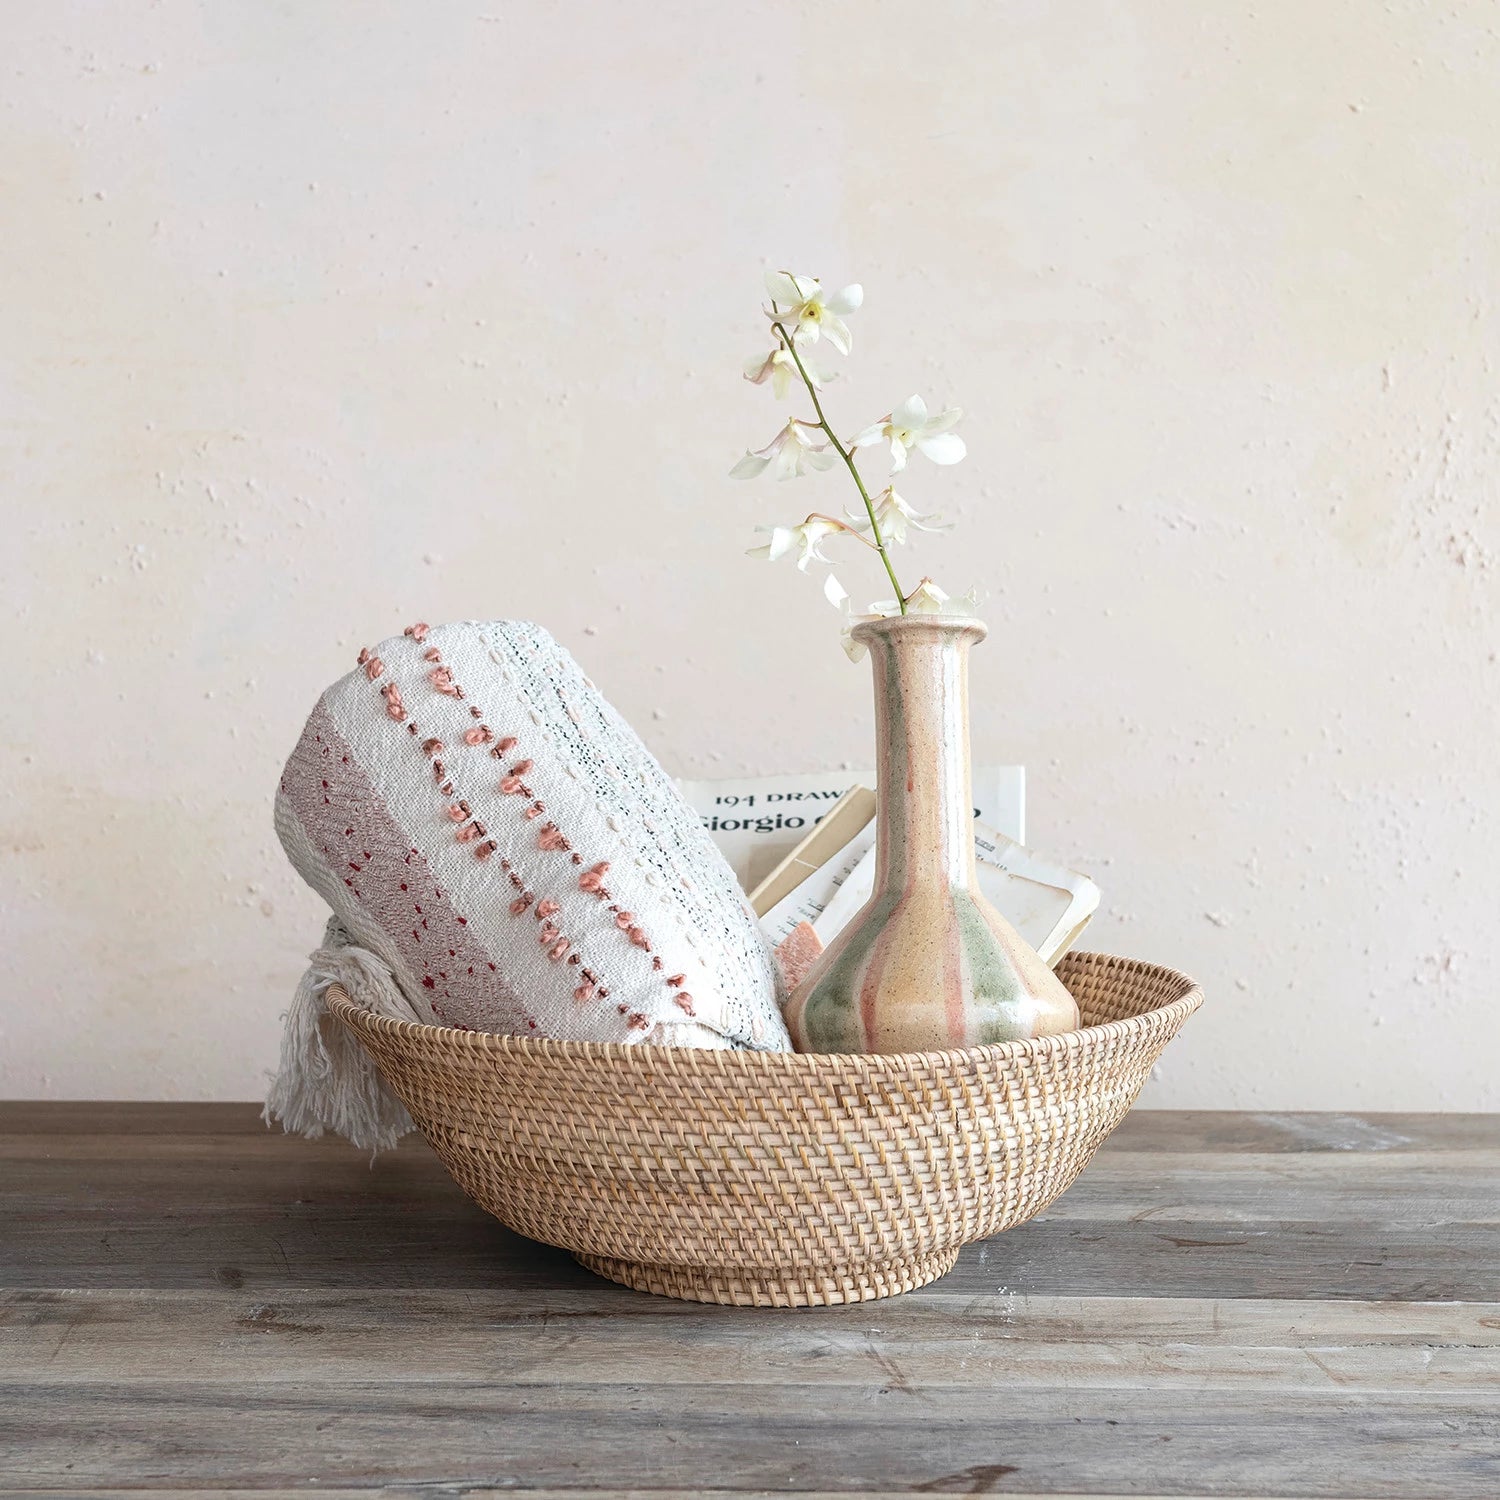 Hand woven natural rattan footed bowl with blanket and vase displayed inside. 